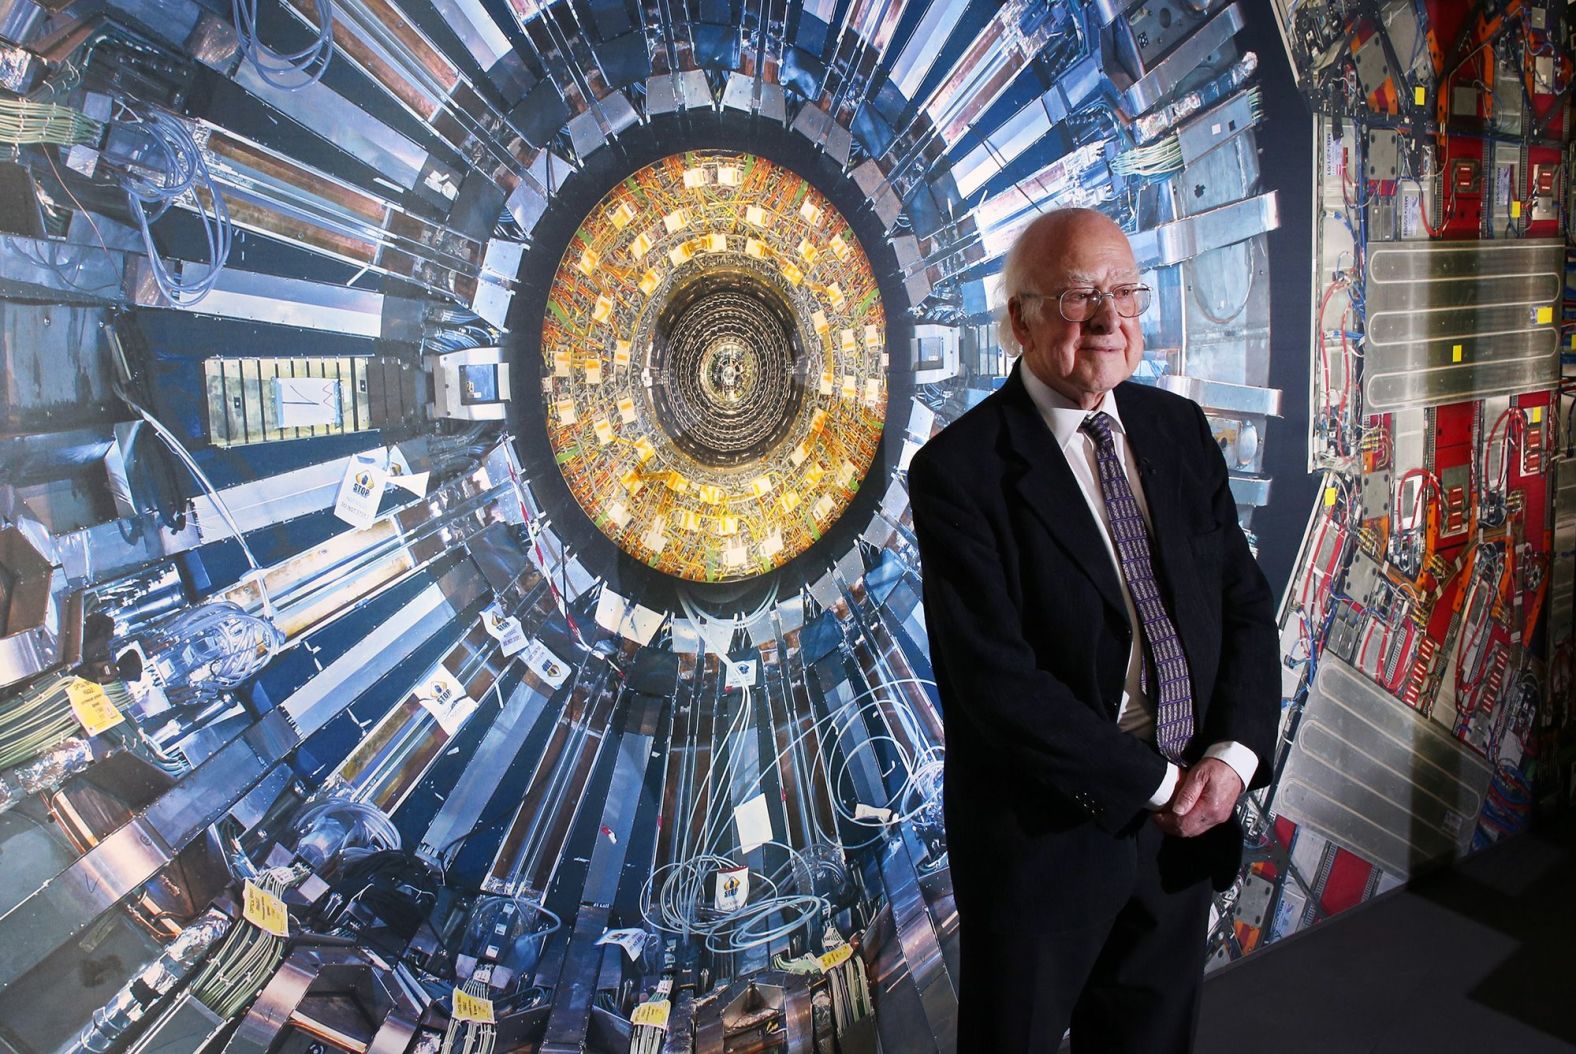 Physicist <a href="index.php?page=&url=https%3A%2F%2Fwww.cnn.com%2F2024%2F04%2F09%2Fworld%2Fpeter-higgs-physicist-nobel-winner-dies-scn%2Findex.html" target="_blank">Peter Higgs</a>, whose theory of an undetected particle in the universe changed science and was vindicated by a Nobel prize-winning discovery half a century later, has died aged 94, the University of Edinburgh said on Tuesday, April 9.